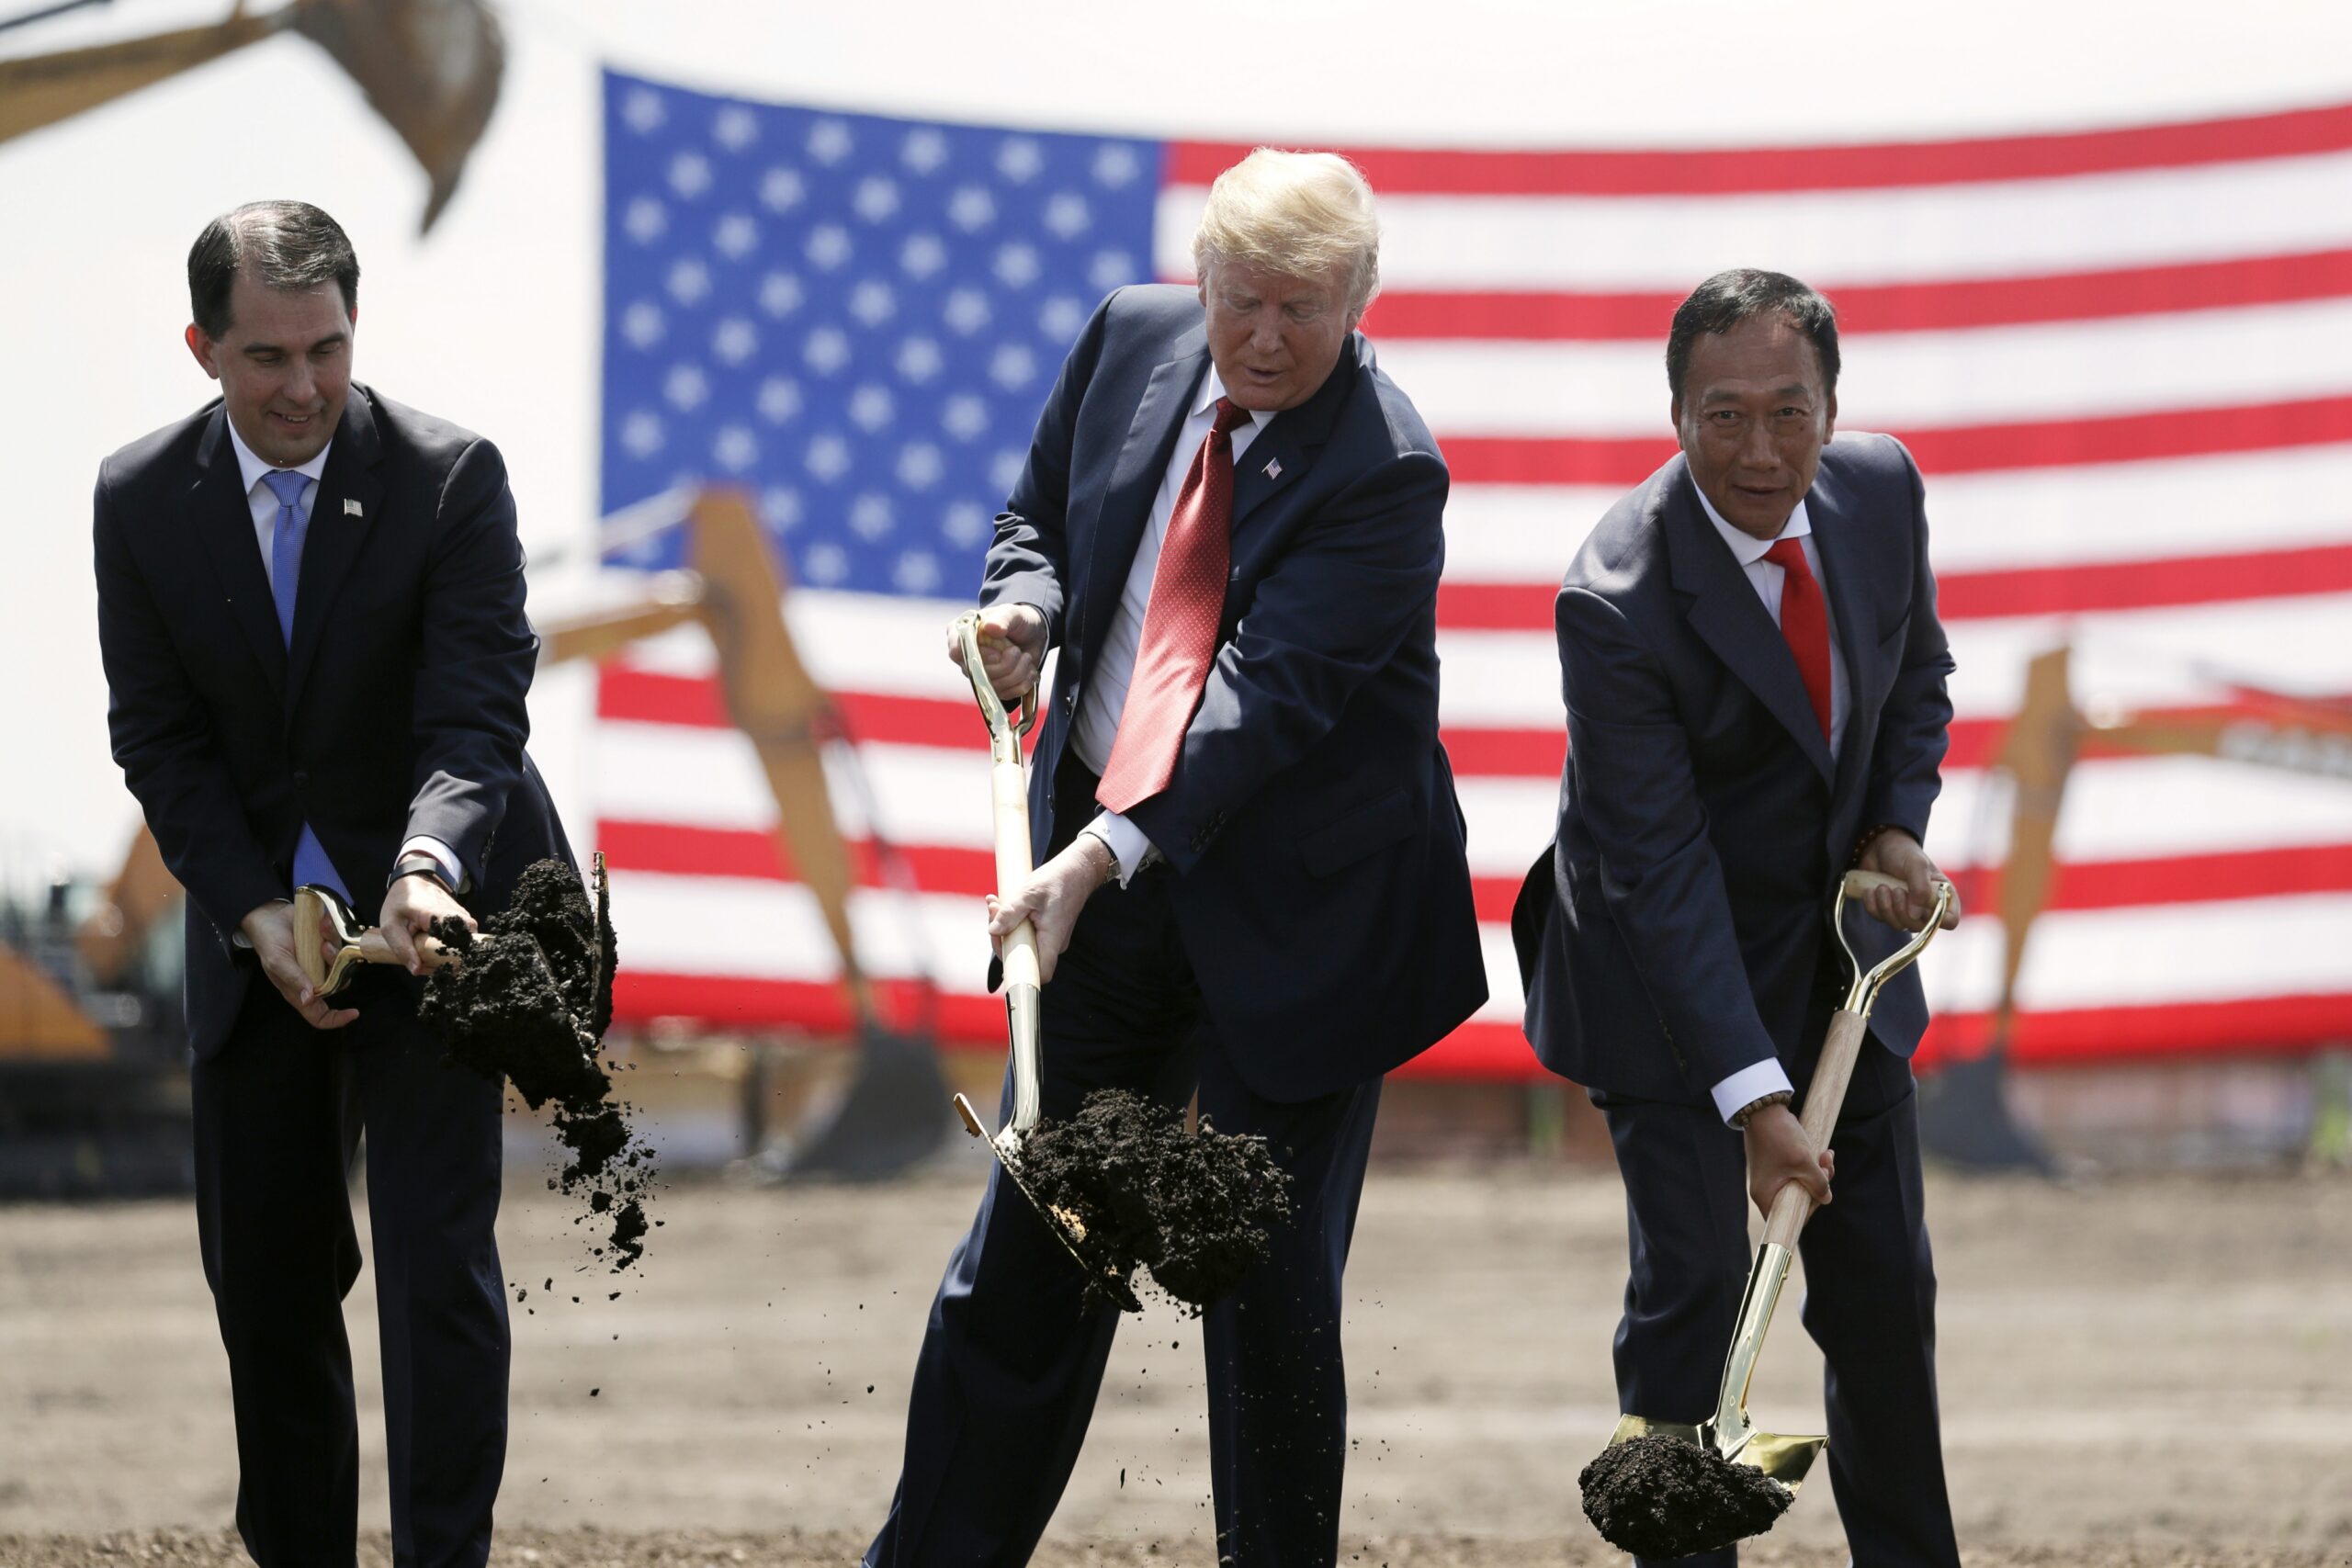 Report: Foxconn Won’t Build TVs At Wisconsin Plant